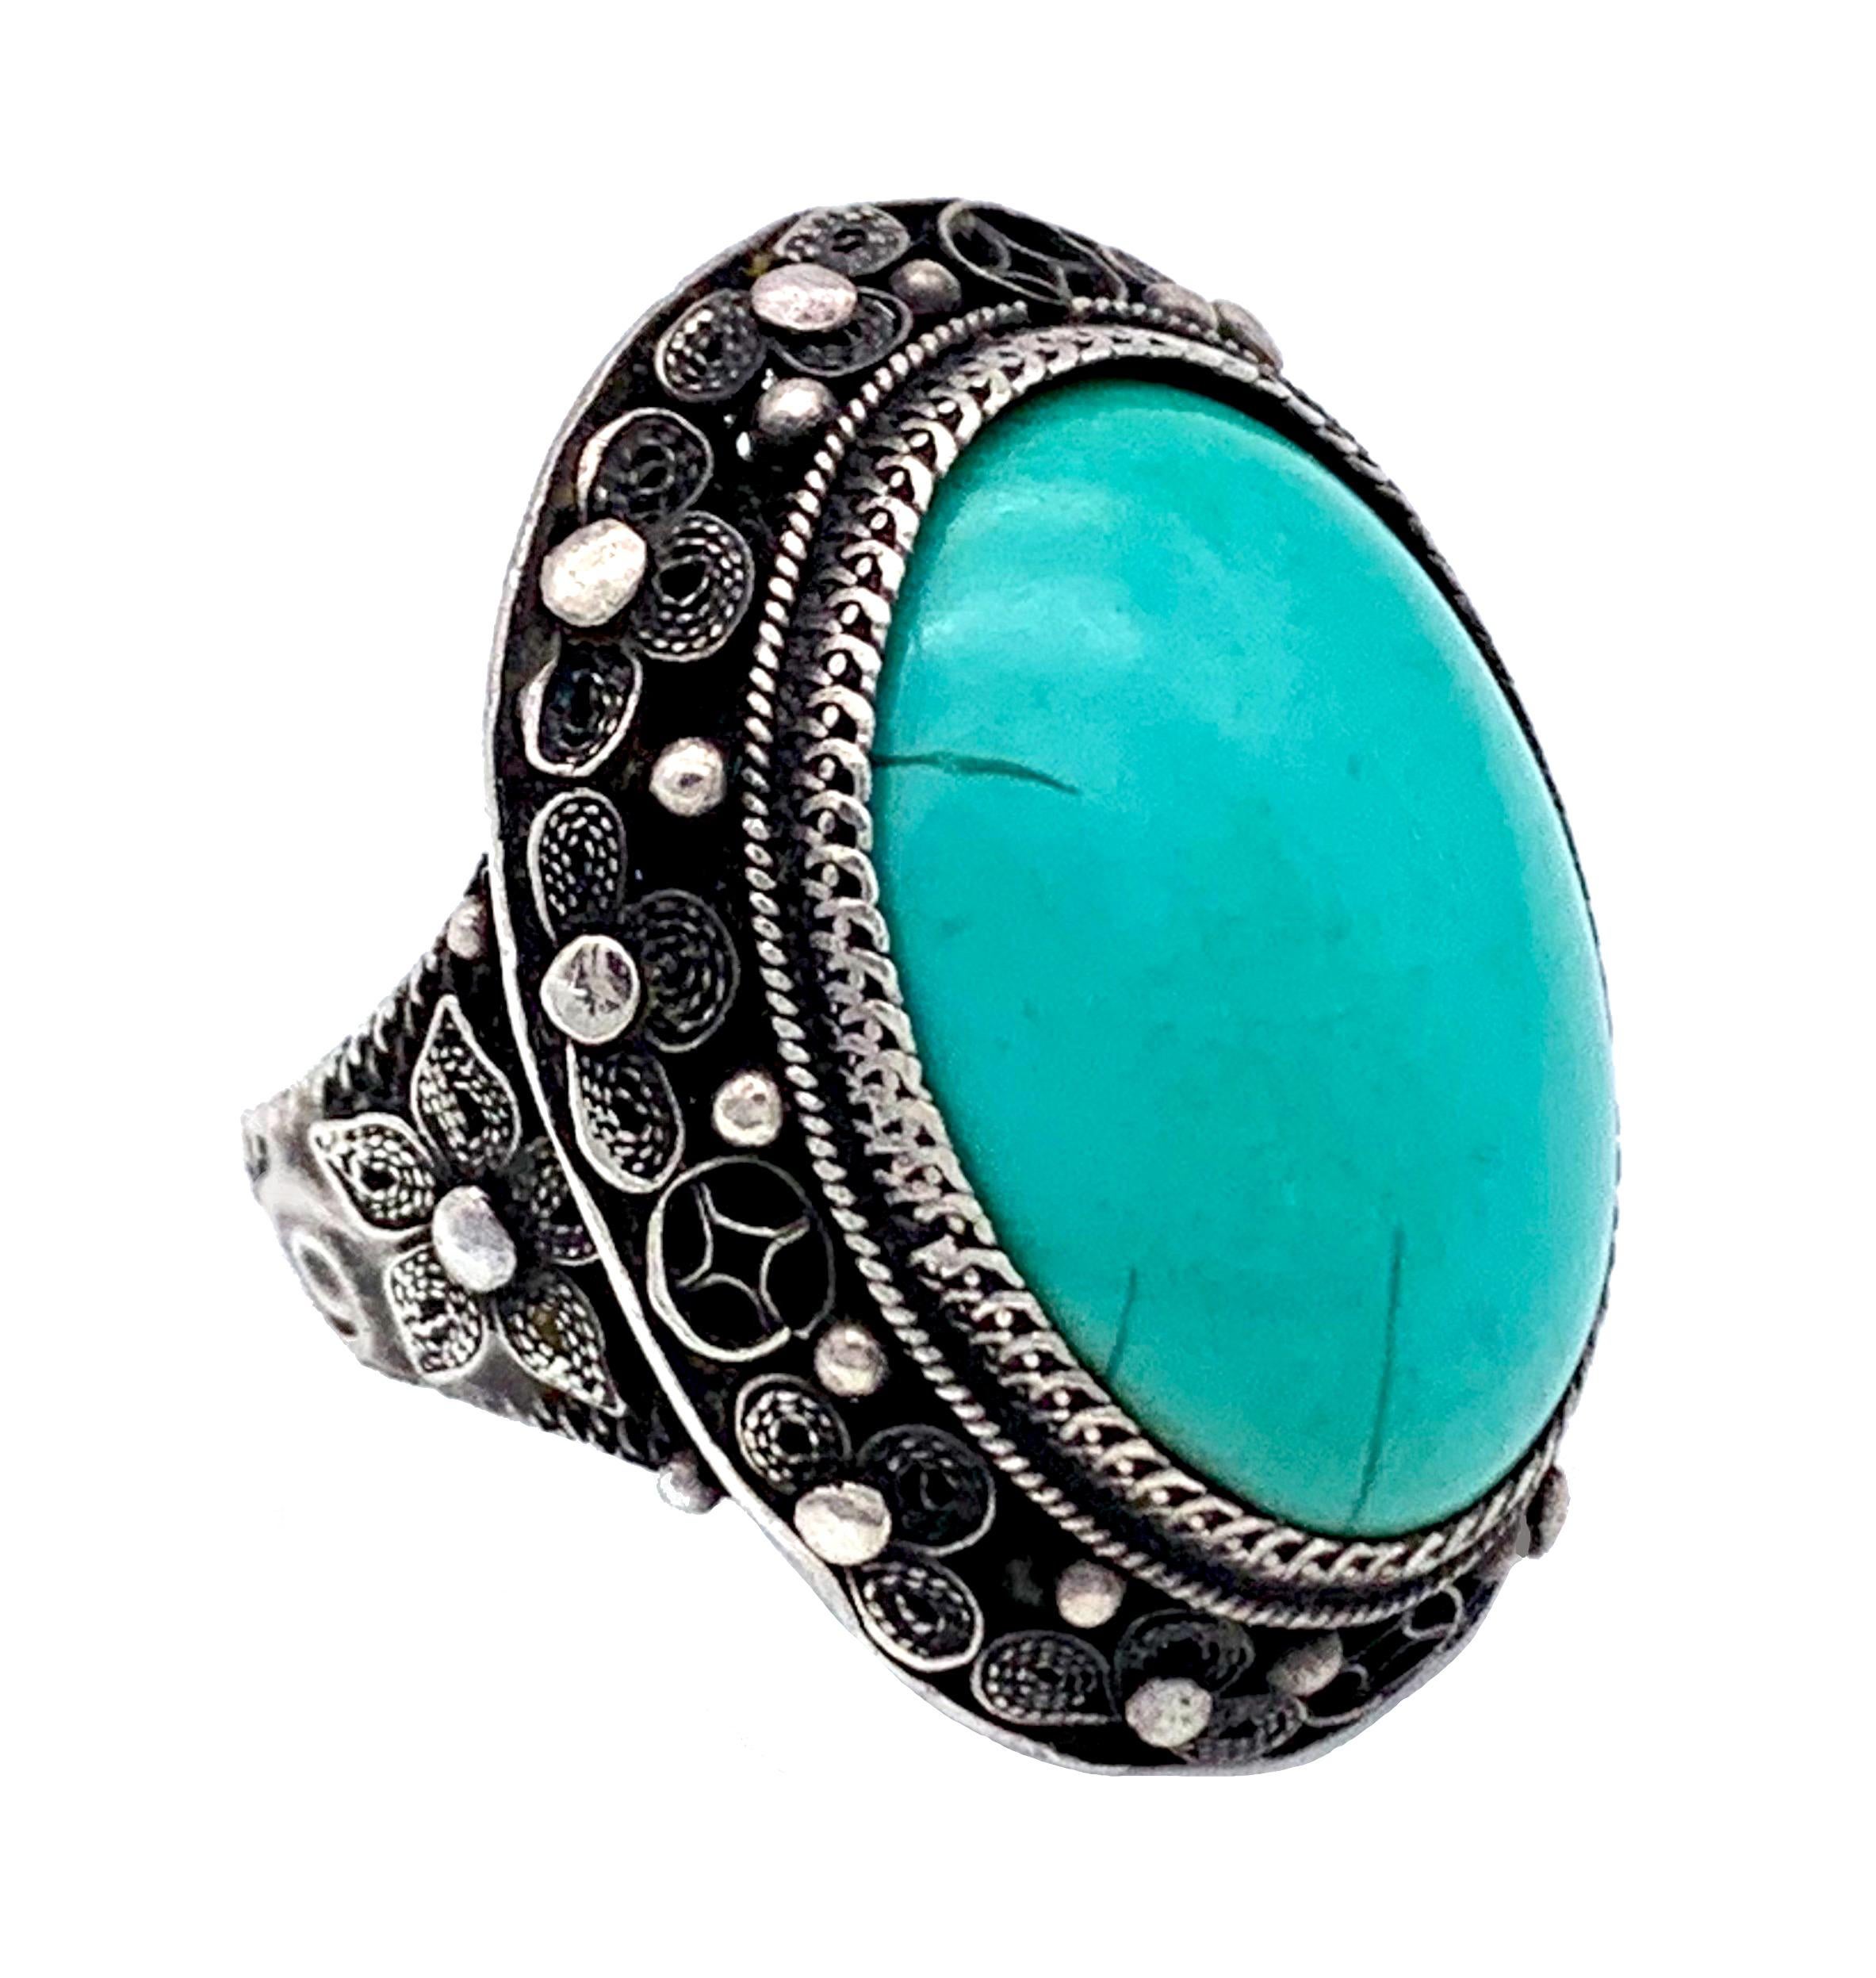 This beautifully crafted Chinese late 19th century silver ring is set with a wonderfully bright turquoise cabochon.
The fine setting is decorated with intricate wire work and granulation.

The top of the ring measures 2.7 x 2.2 cm